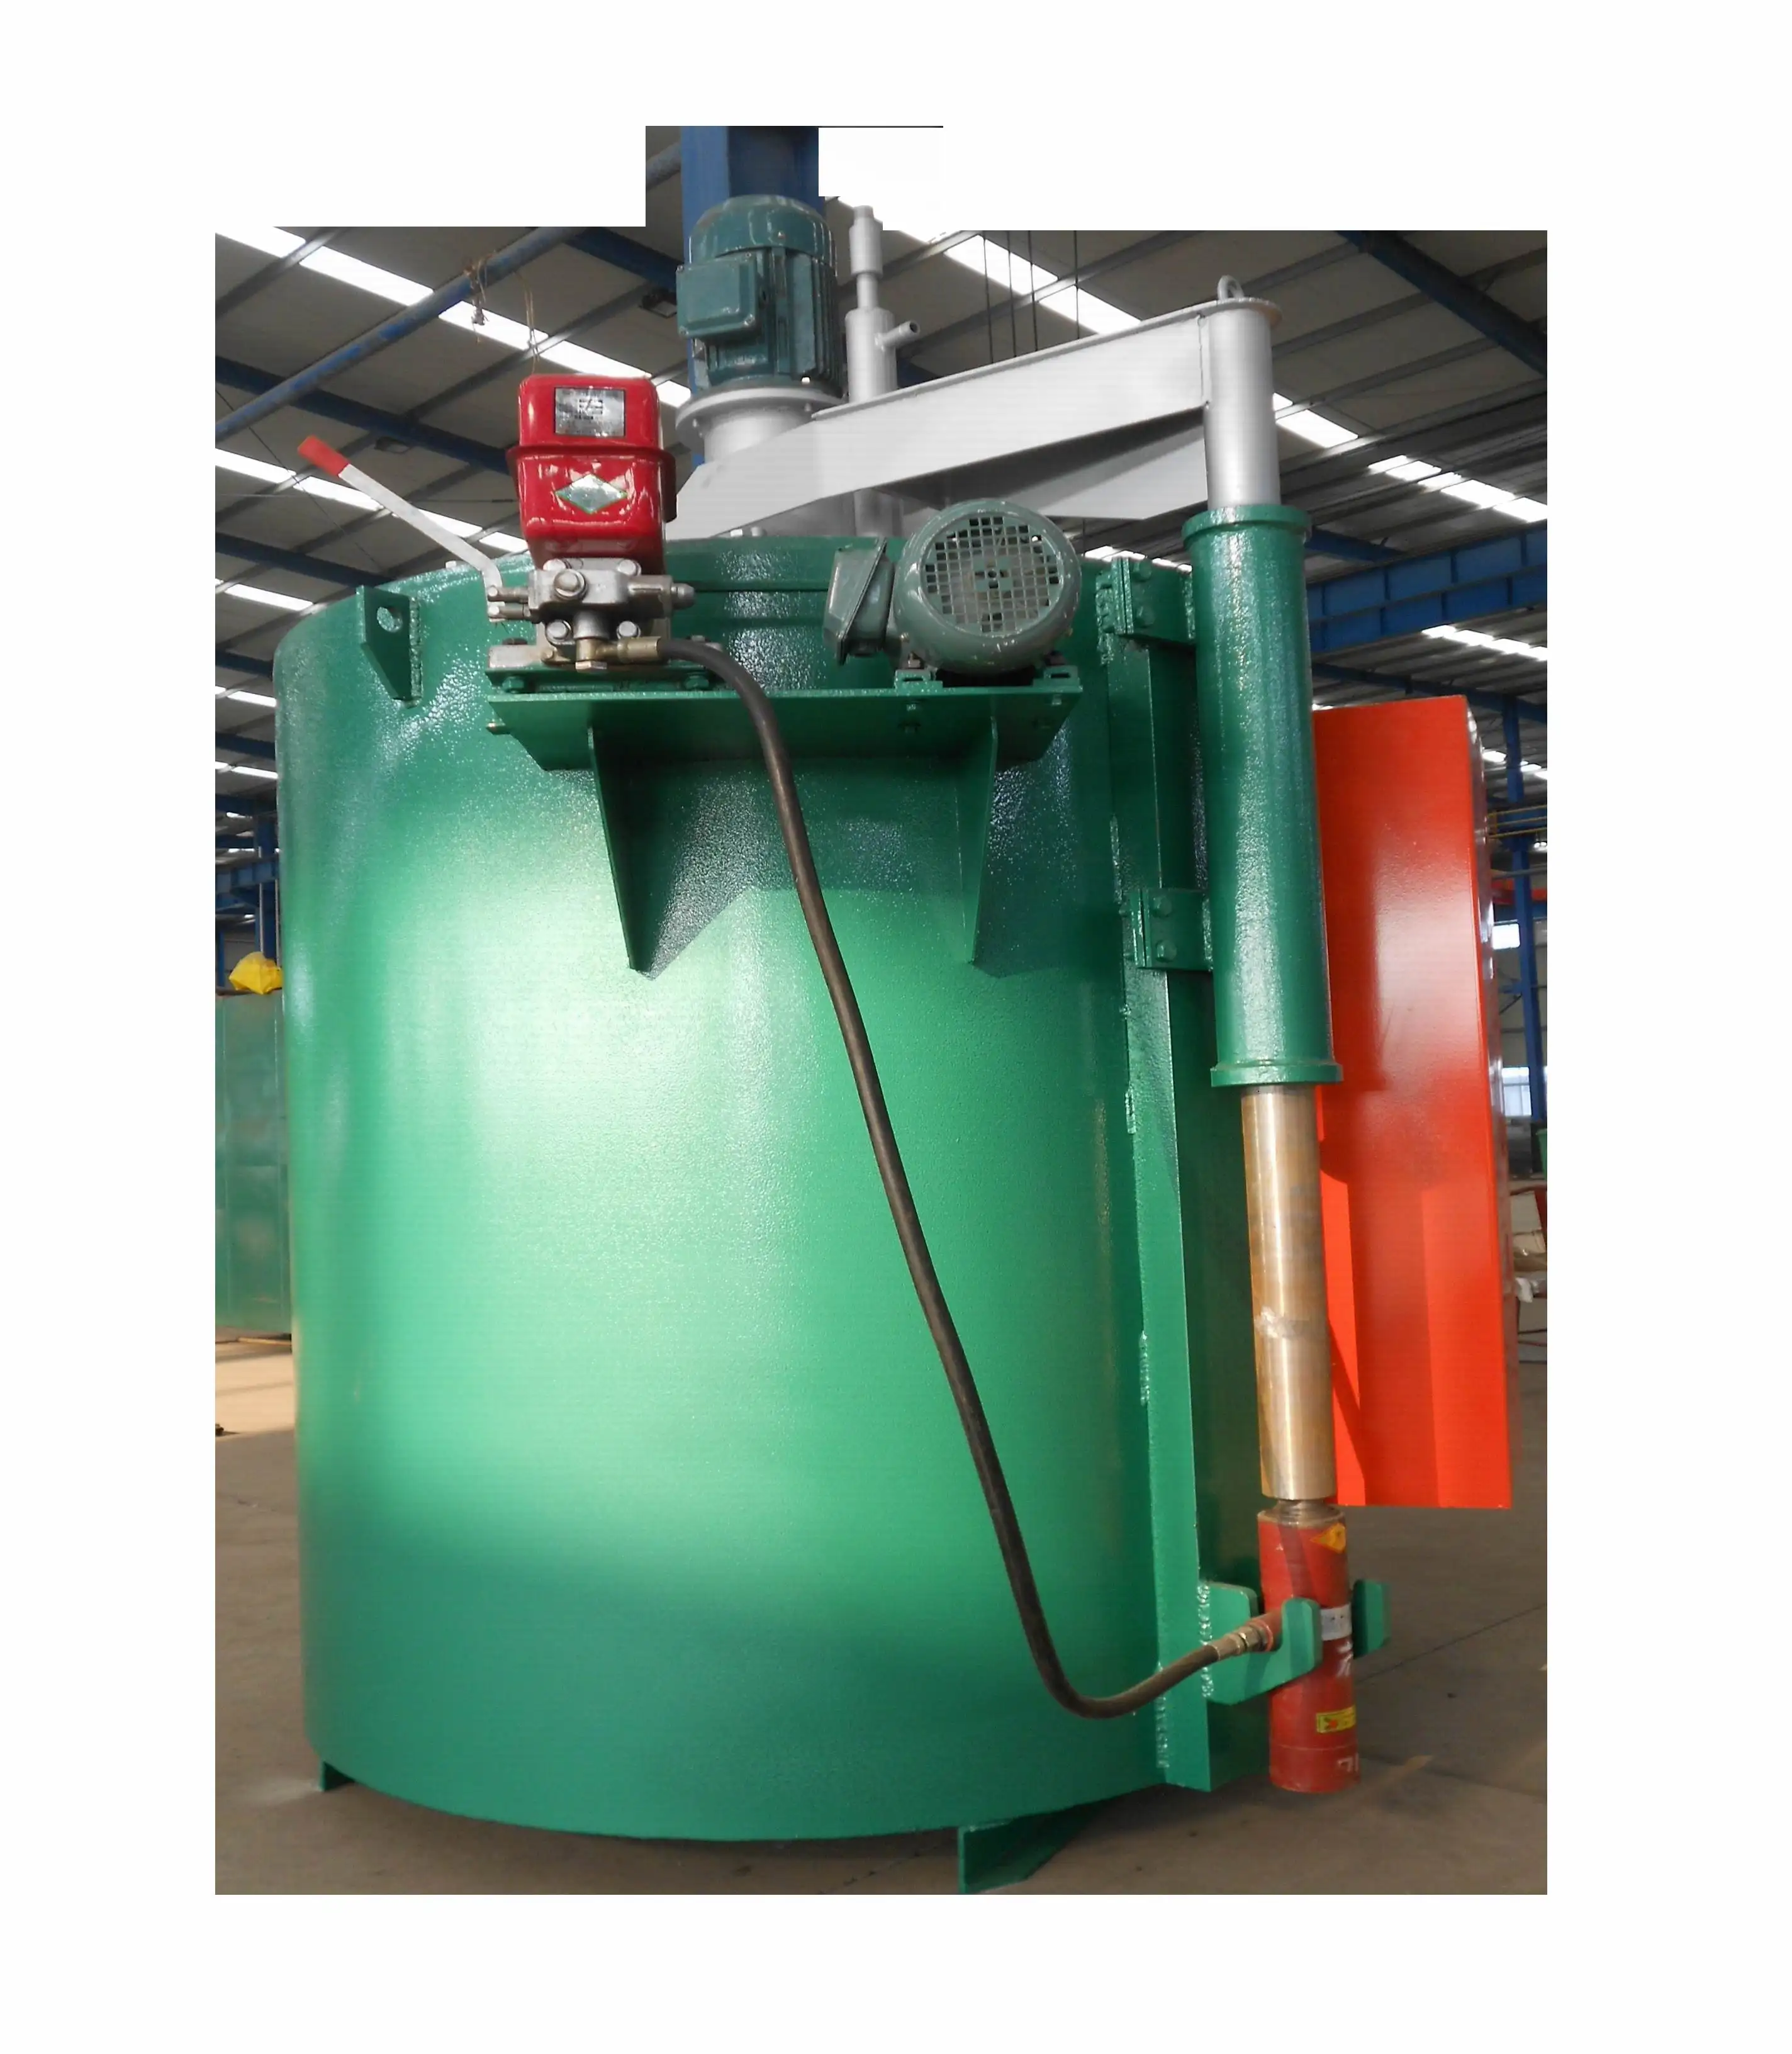 All fiber well type carburizing furnace for metal heat treatment